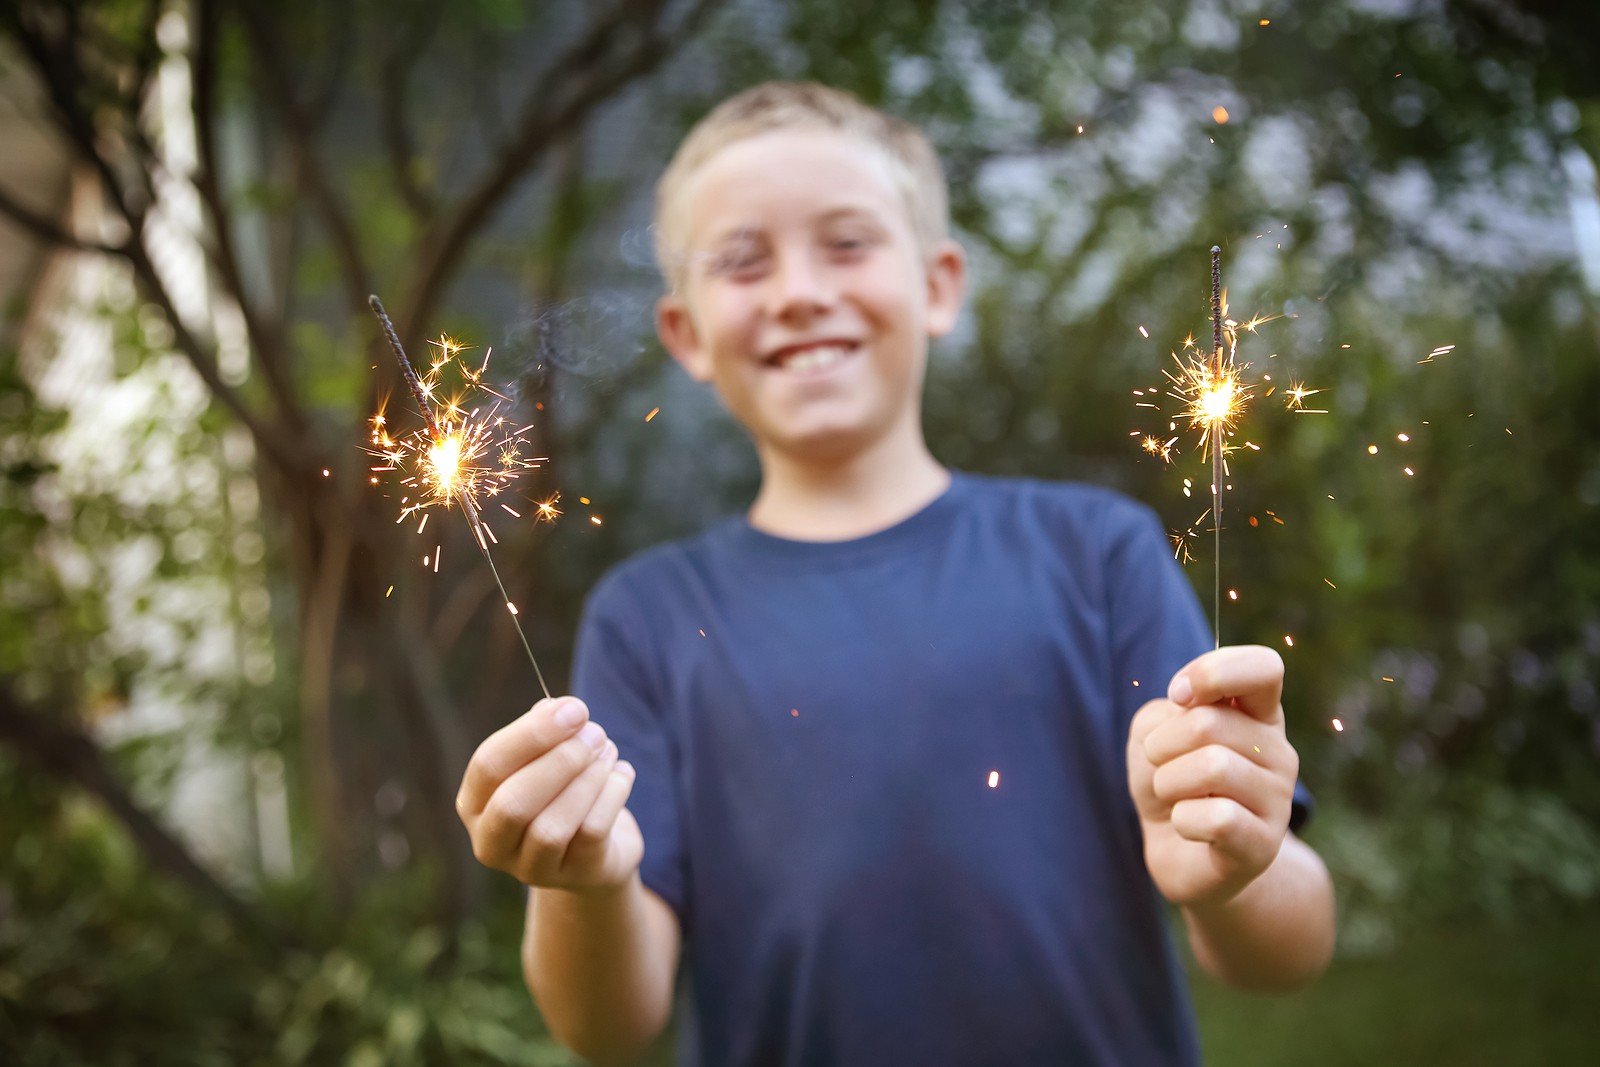 fireworks eye safety tips in texas